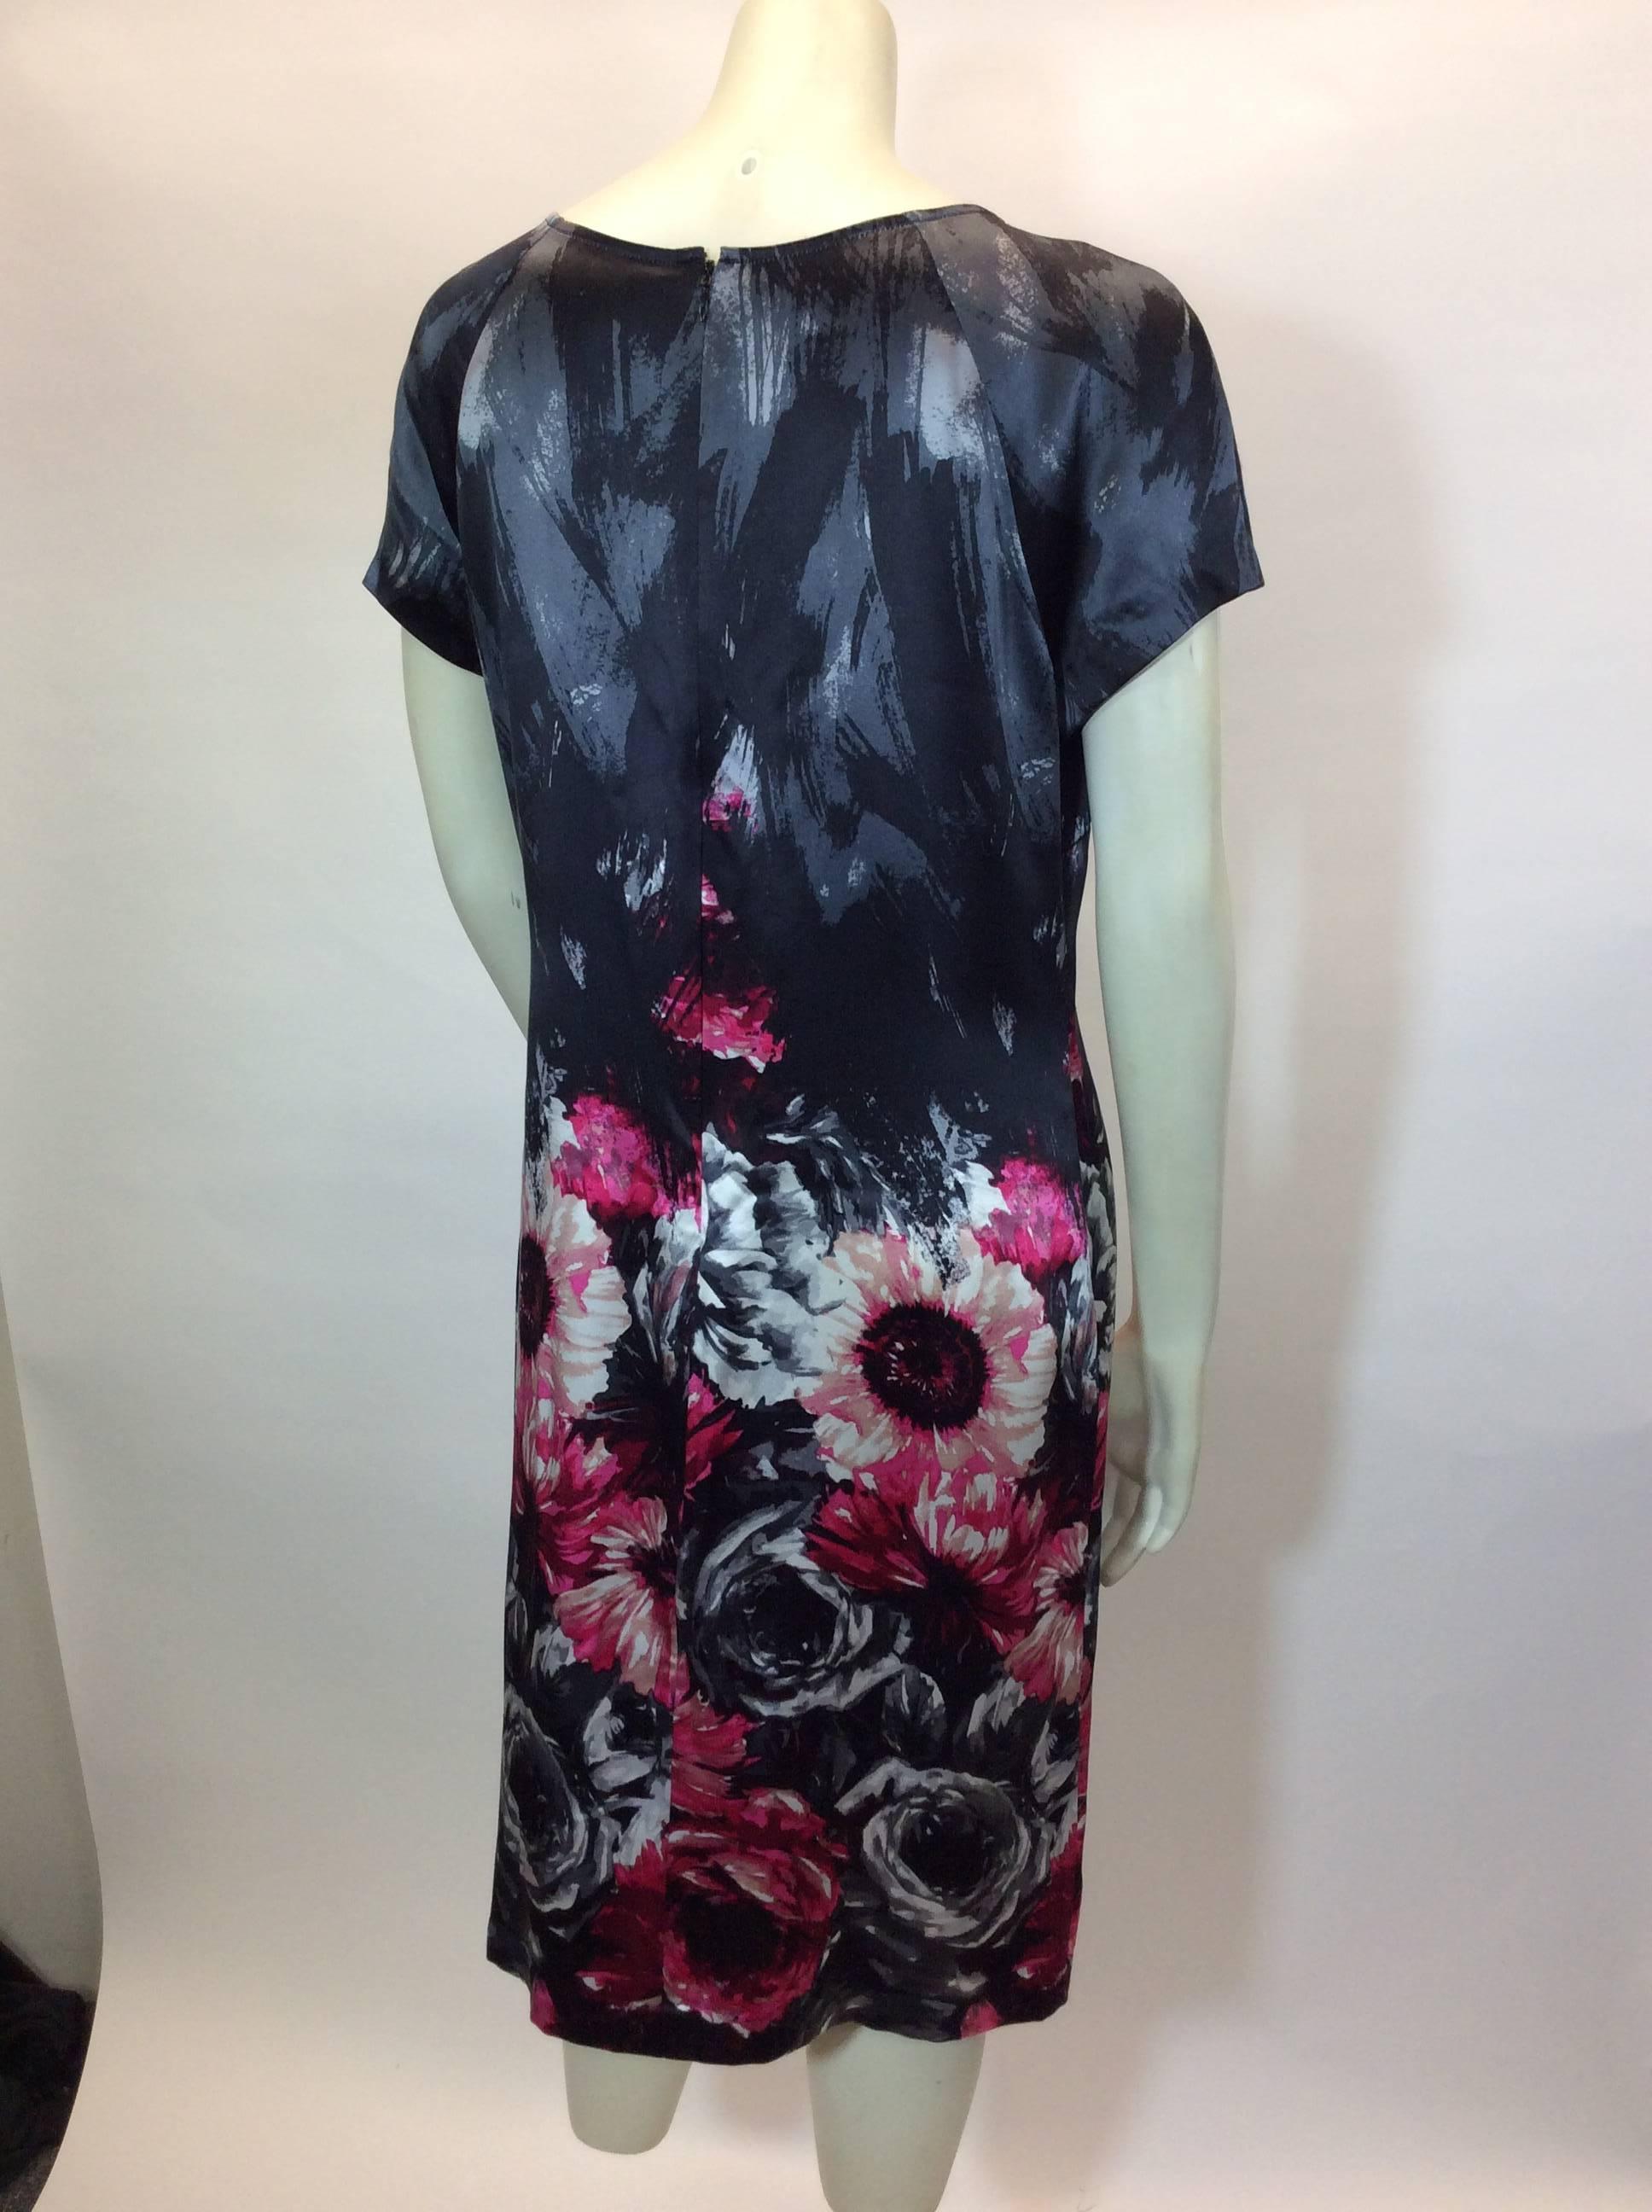 St. John Floral Printed Silk Dress In Excellent Condition For Sale In Narberth, PA